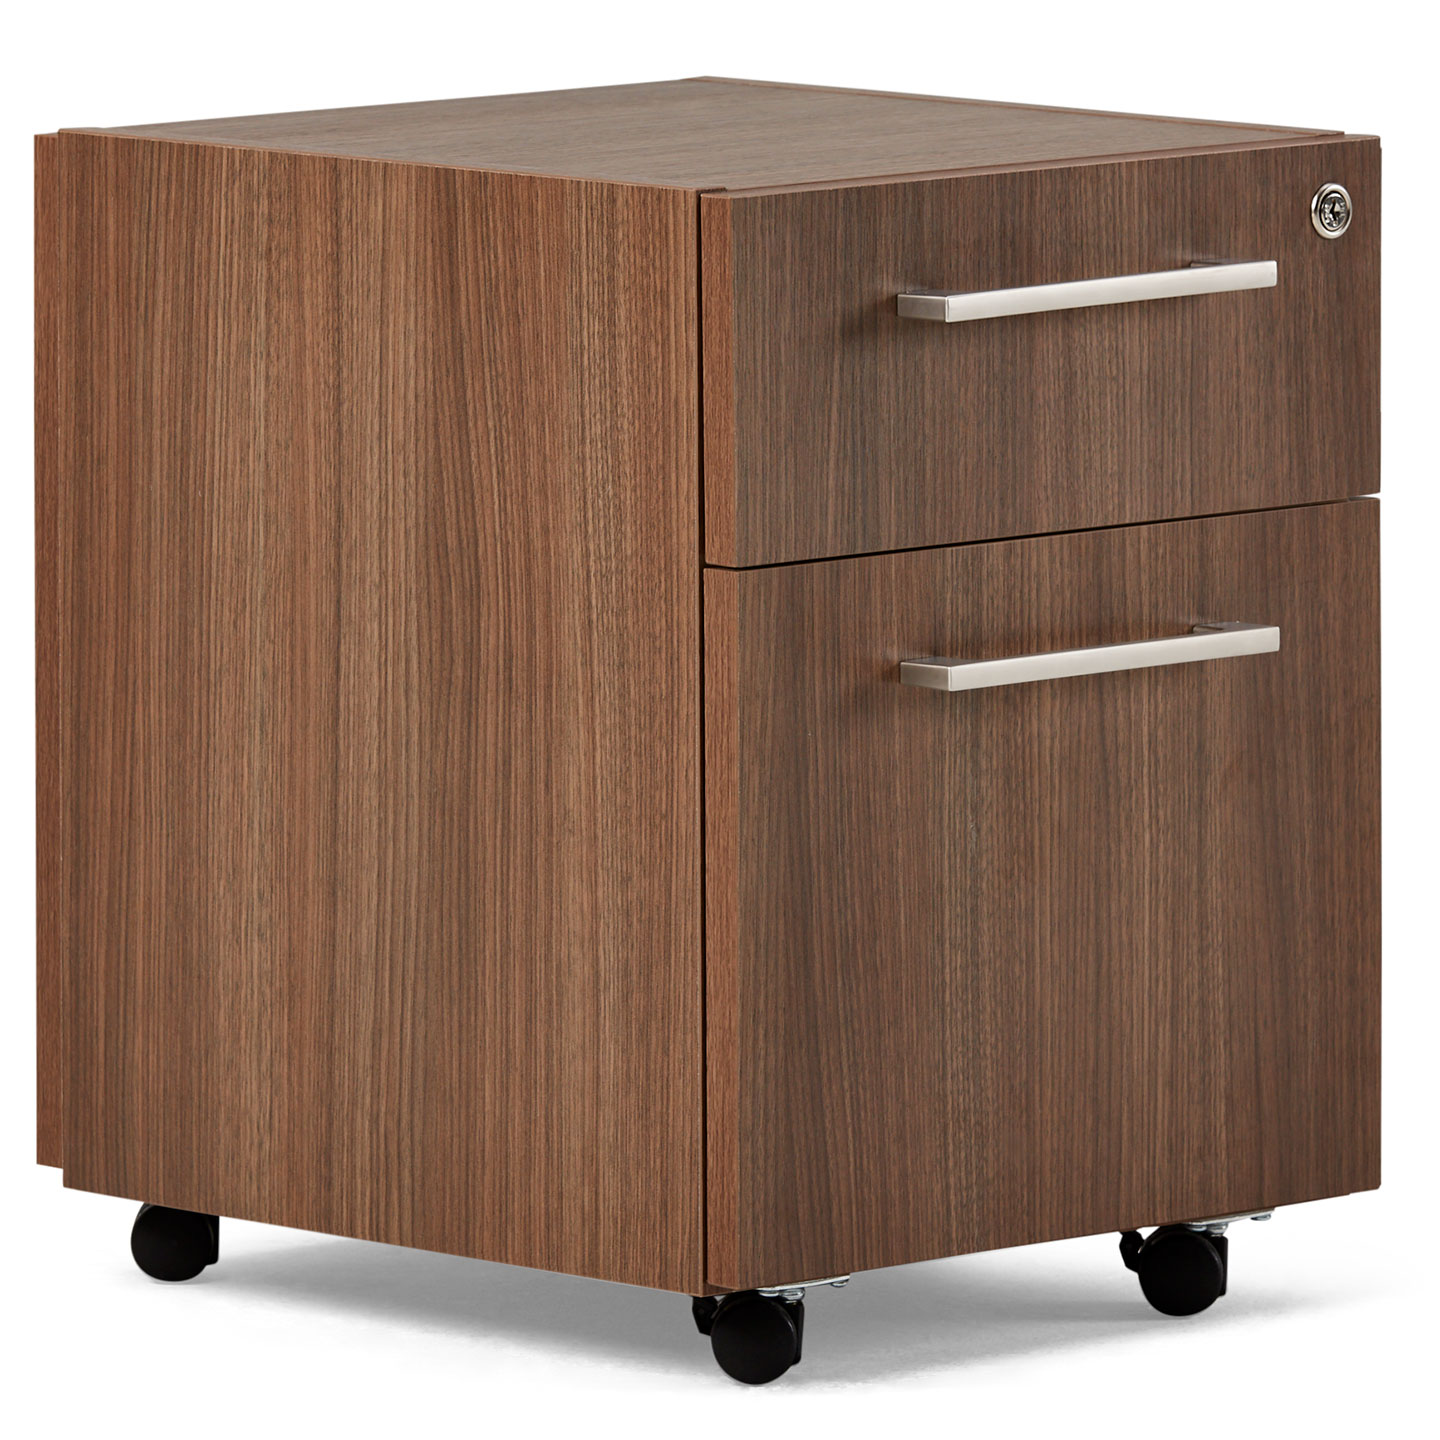 Compose pedestal in wood with Linear drawer pulls and lock drawer.  